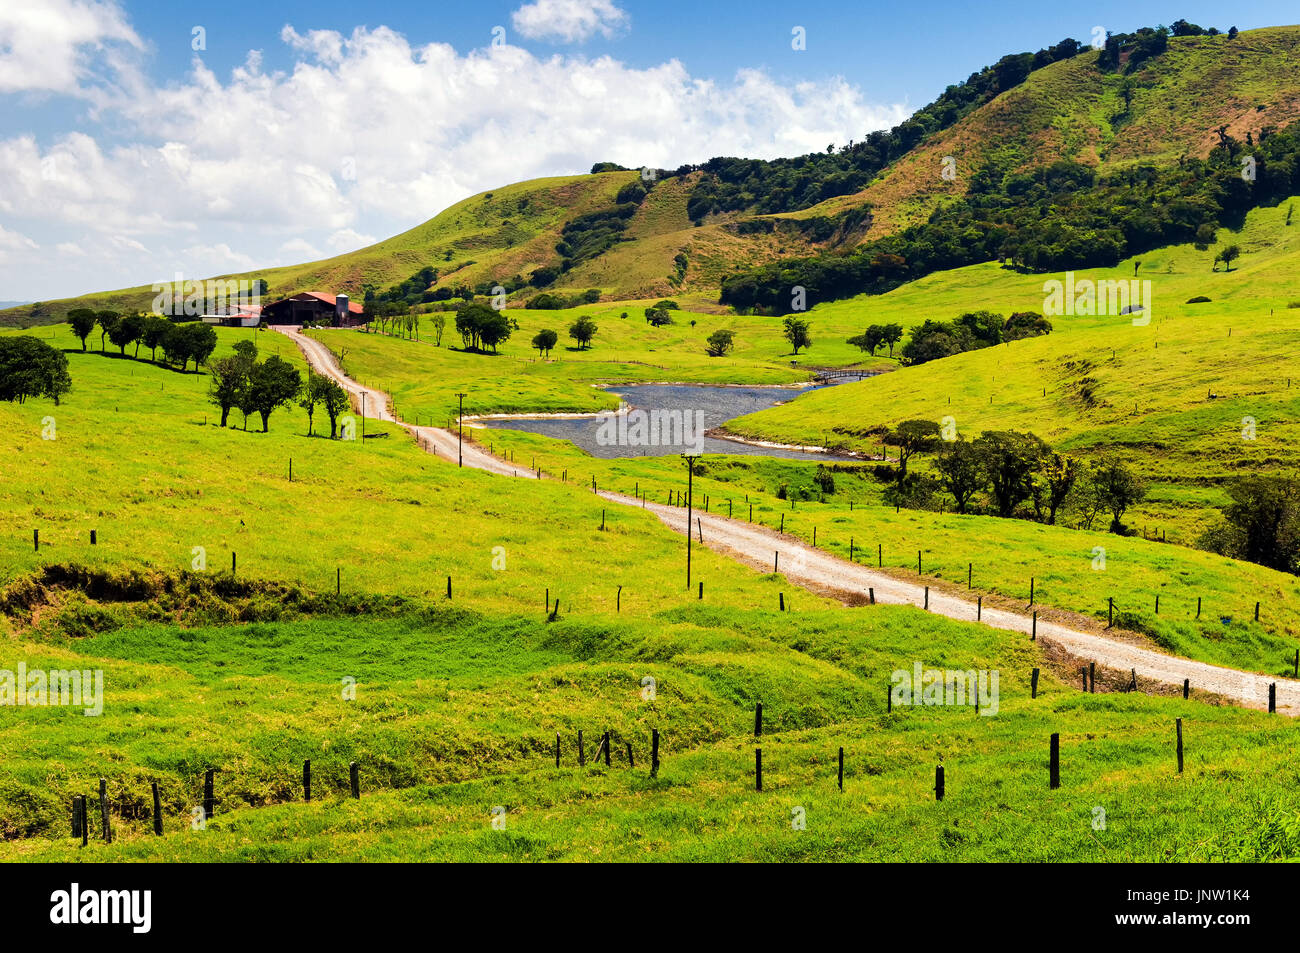 An example of cultural landscape in Costa Rica (Northern Plains province). Stock Photo